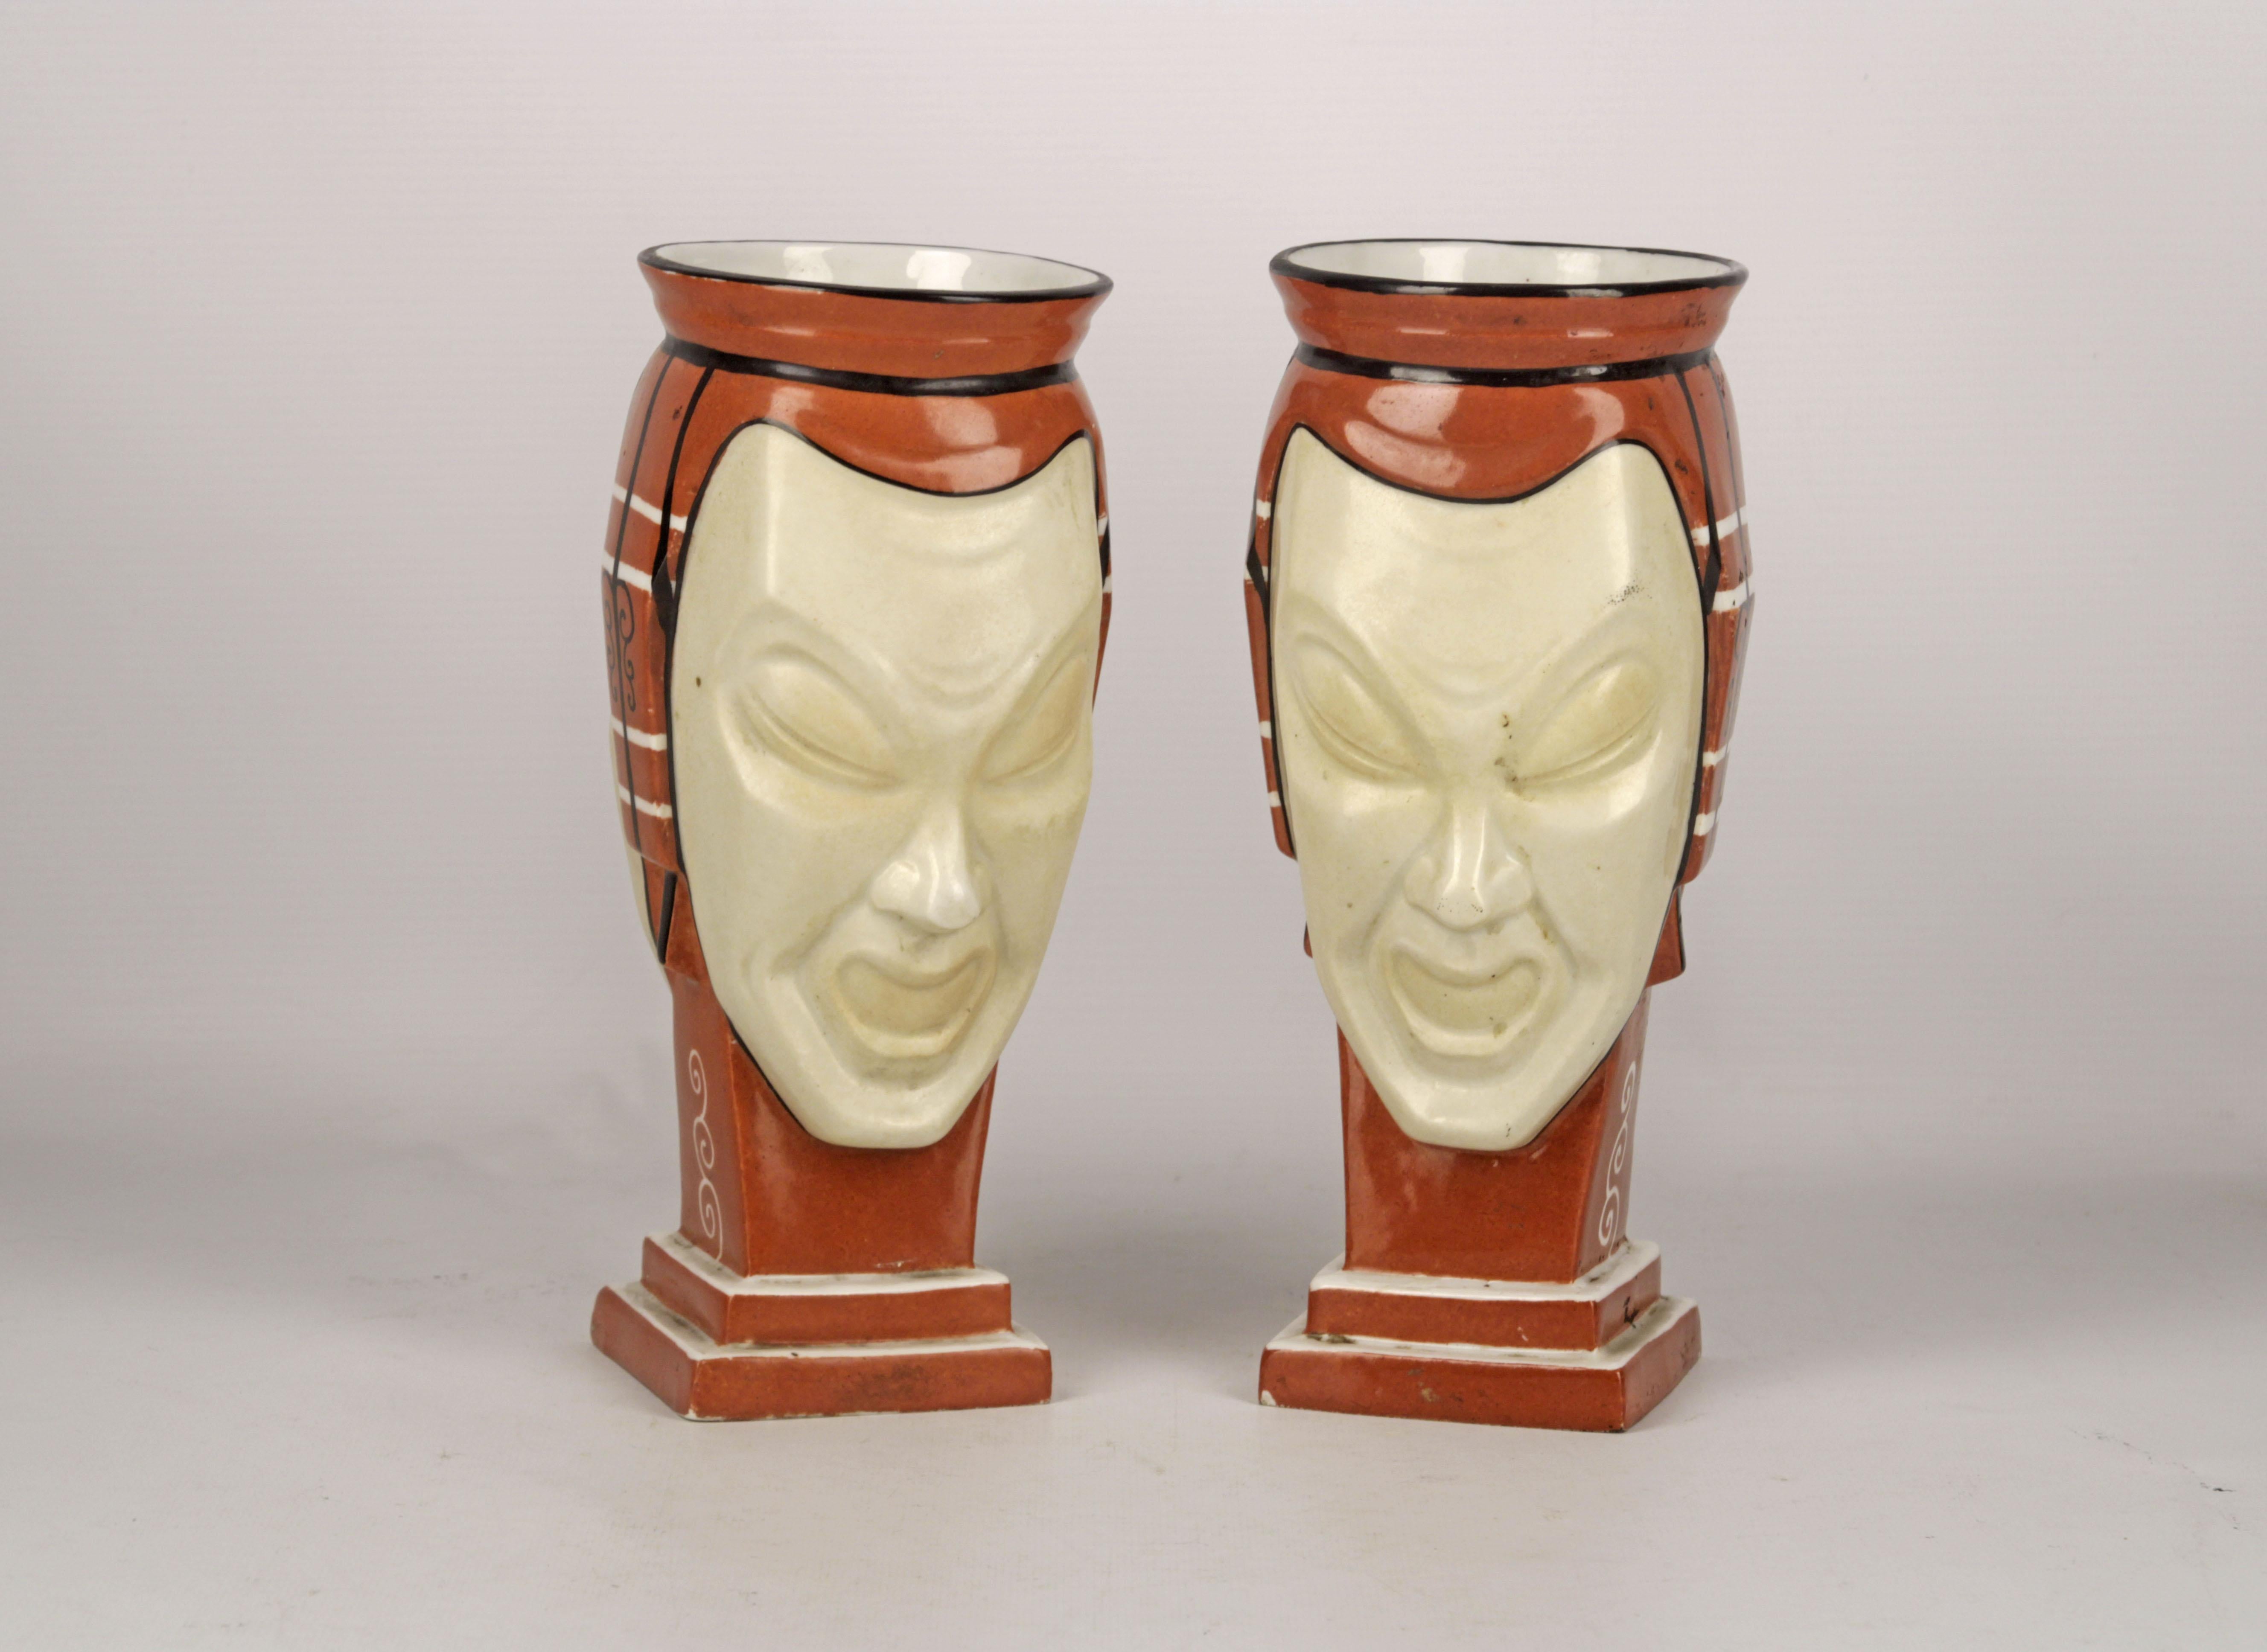 Molded Pair of French Vases Made of Porcelain Representing Two Faces Signed by Aladin For Sale